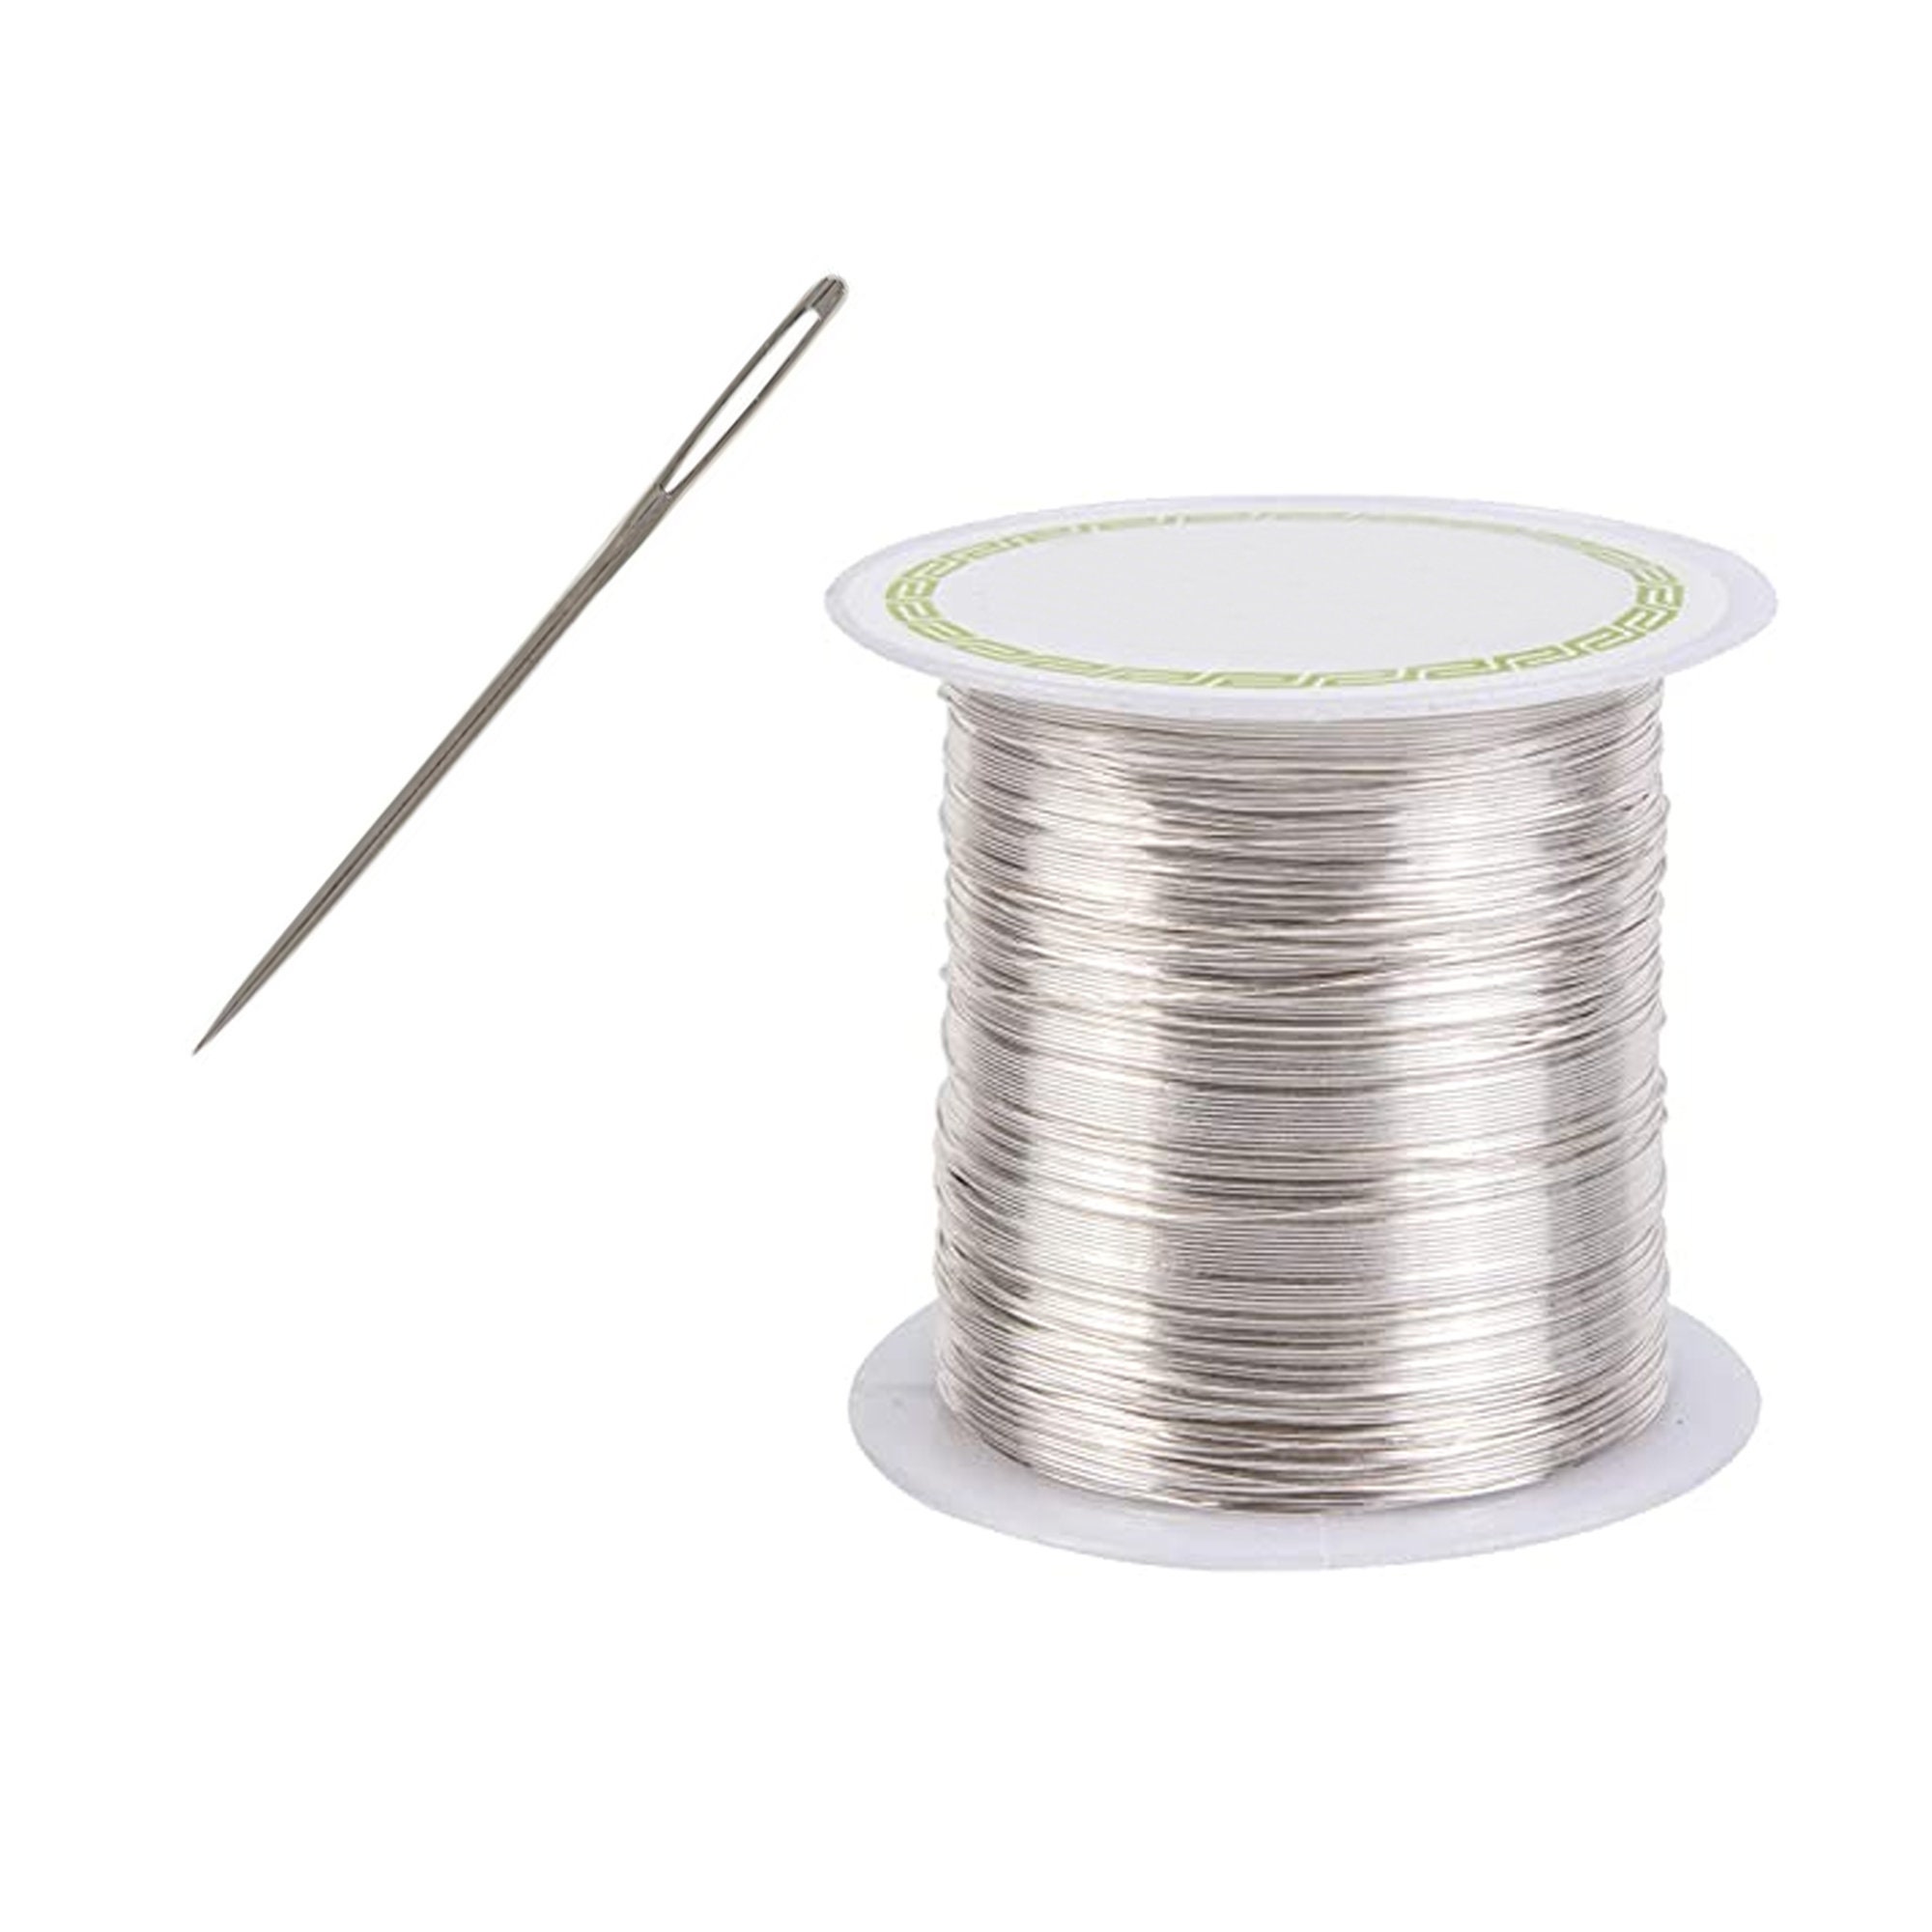 China Custom Anti-static Silver Coated Conductive Thread Manufacturers and  Factory - Wholesale Silver Sewing Thread for Sale - KAZHTEX